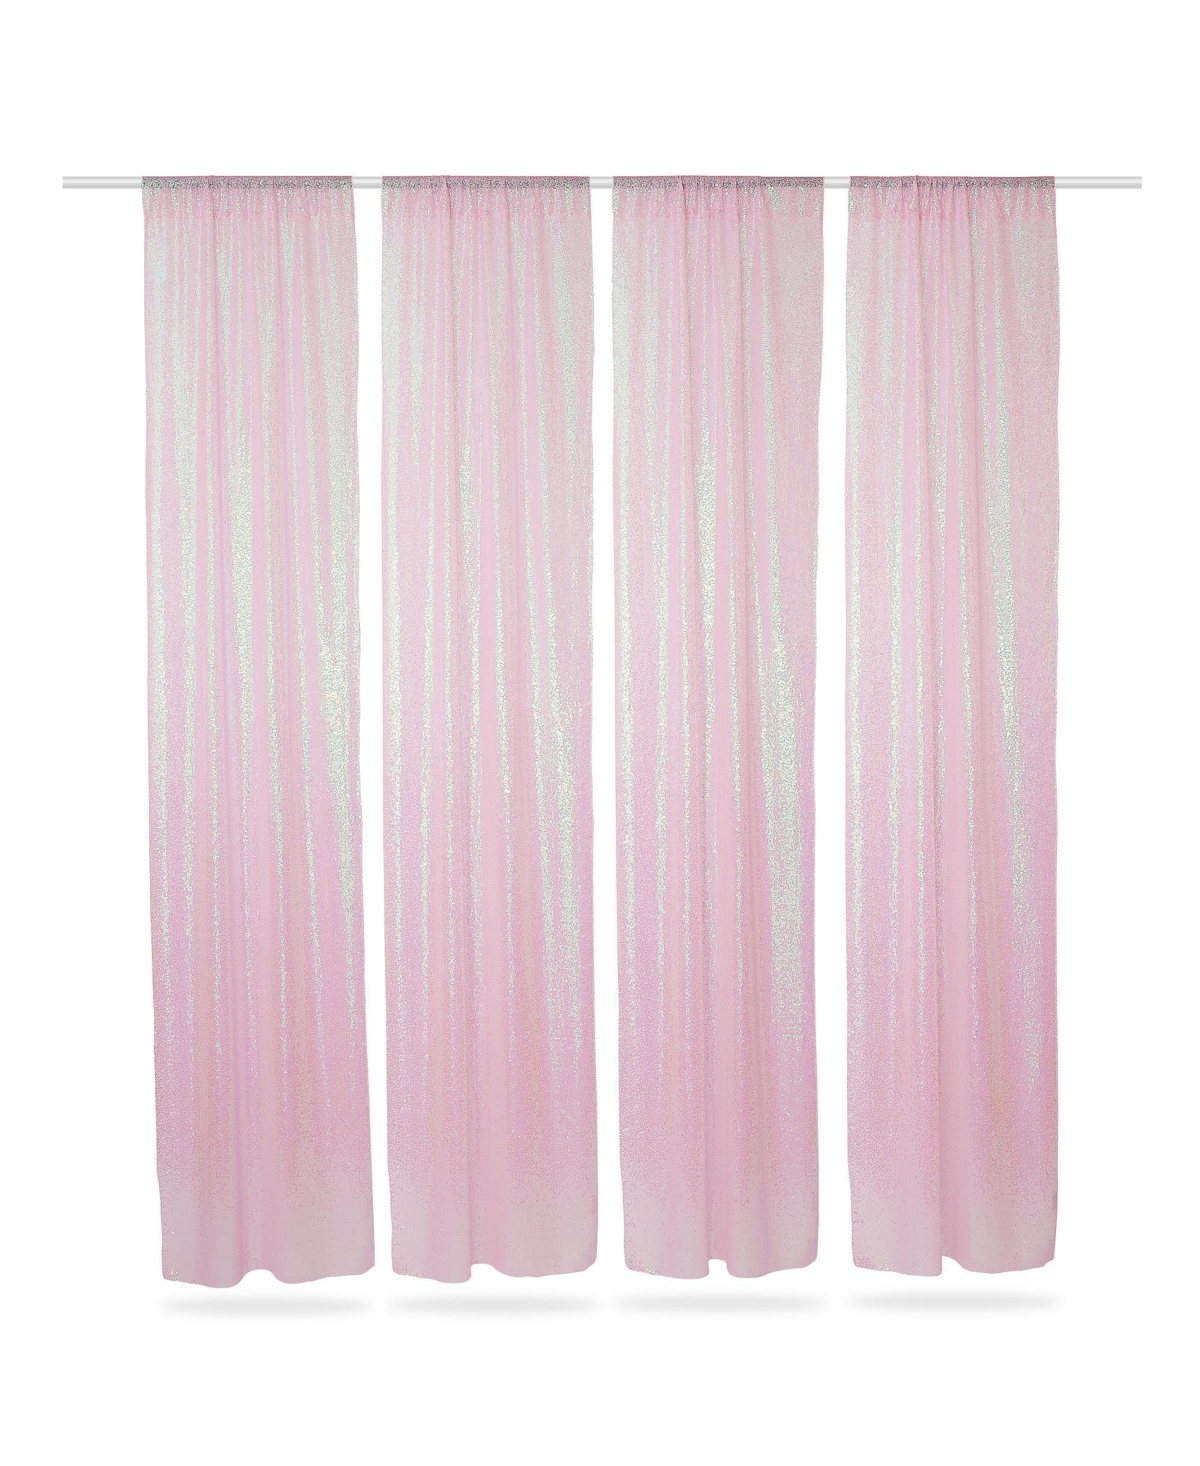 (Set of 4) Sequin Backdrop Curtains, 2ft x 8ft Pink Glitter Backgrounds - Pink